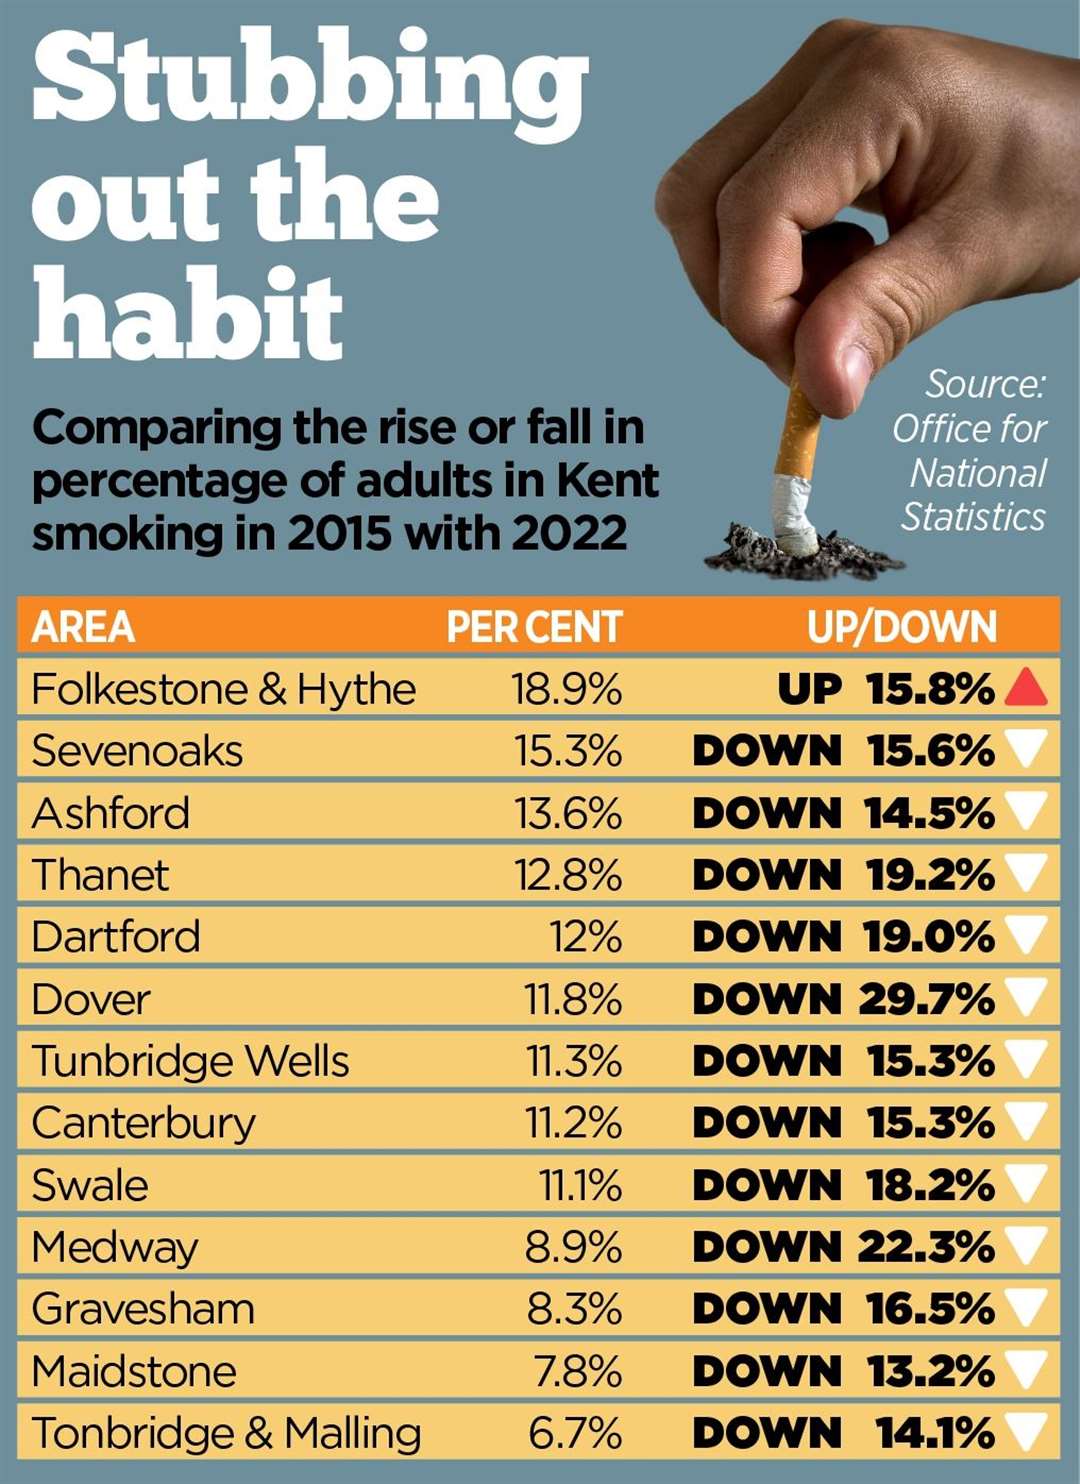 Rates of smoking in Kent council areas, comparing 2015 to 2022